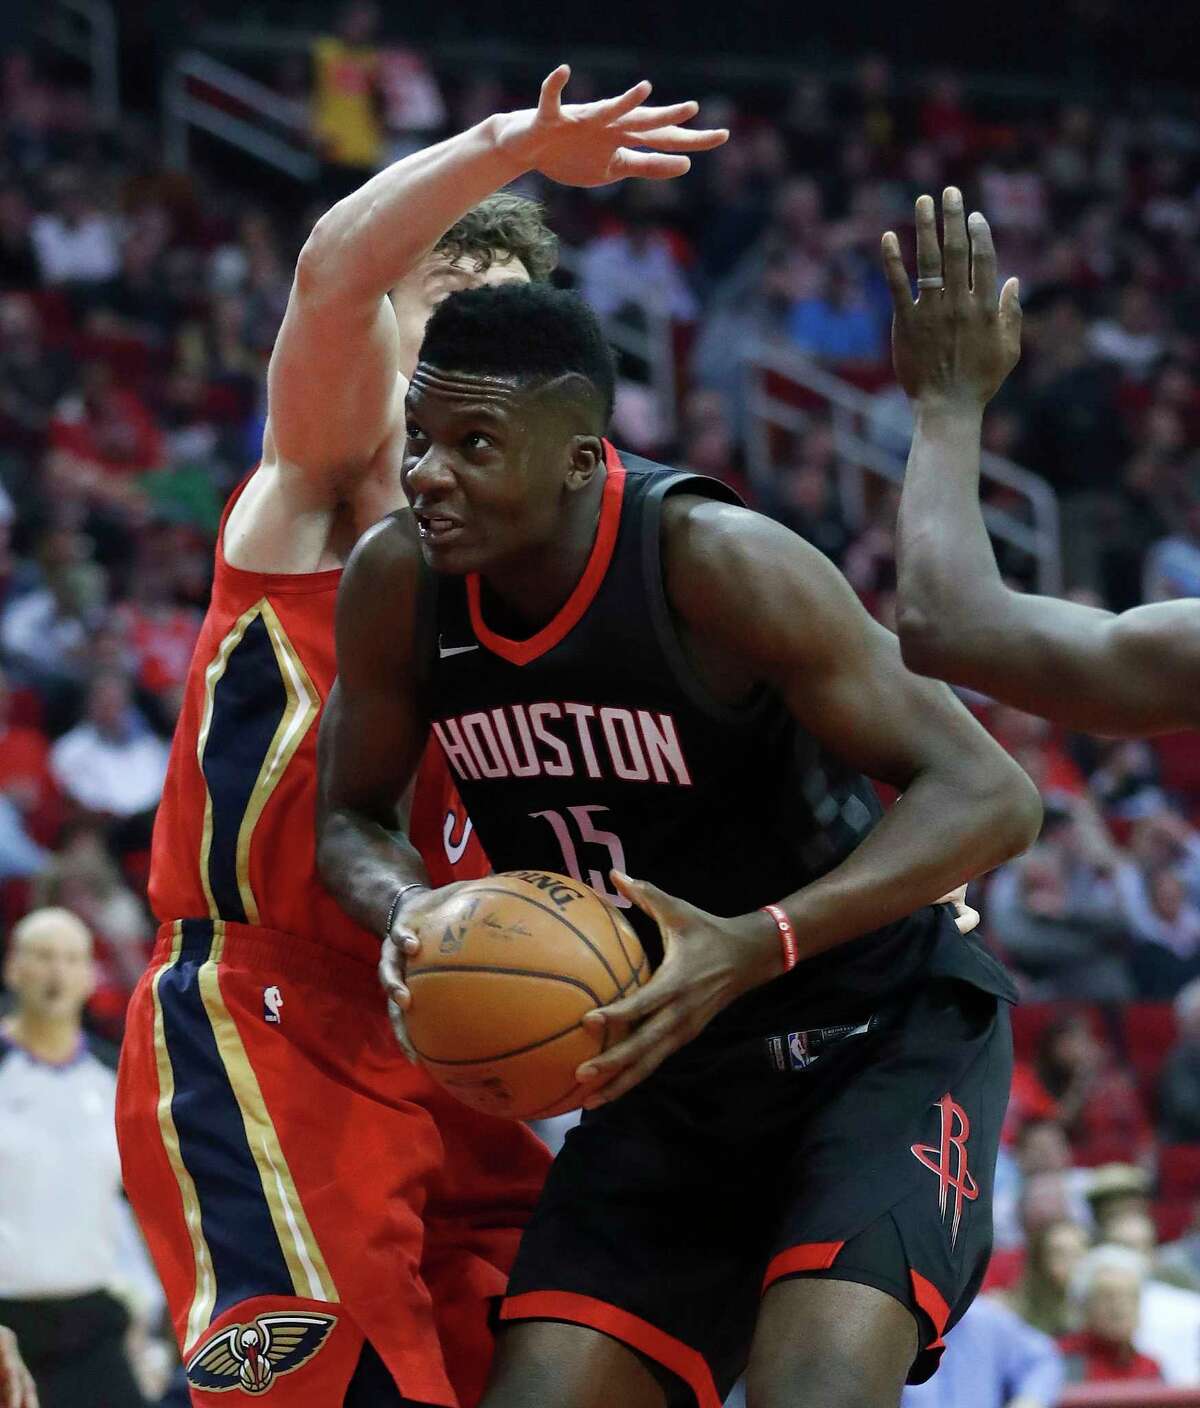 Houston Rockets center Clint Capela (15) dives under the basket during the first half of an NBA game at Toyota Center, Monday, Dec. 11, 2017, in Houston.